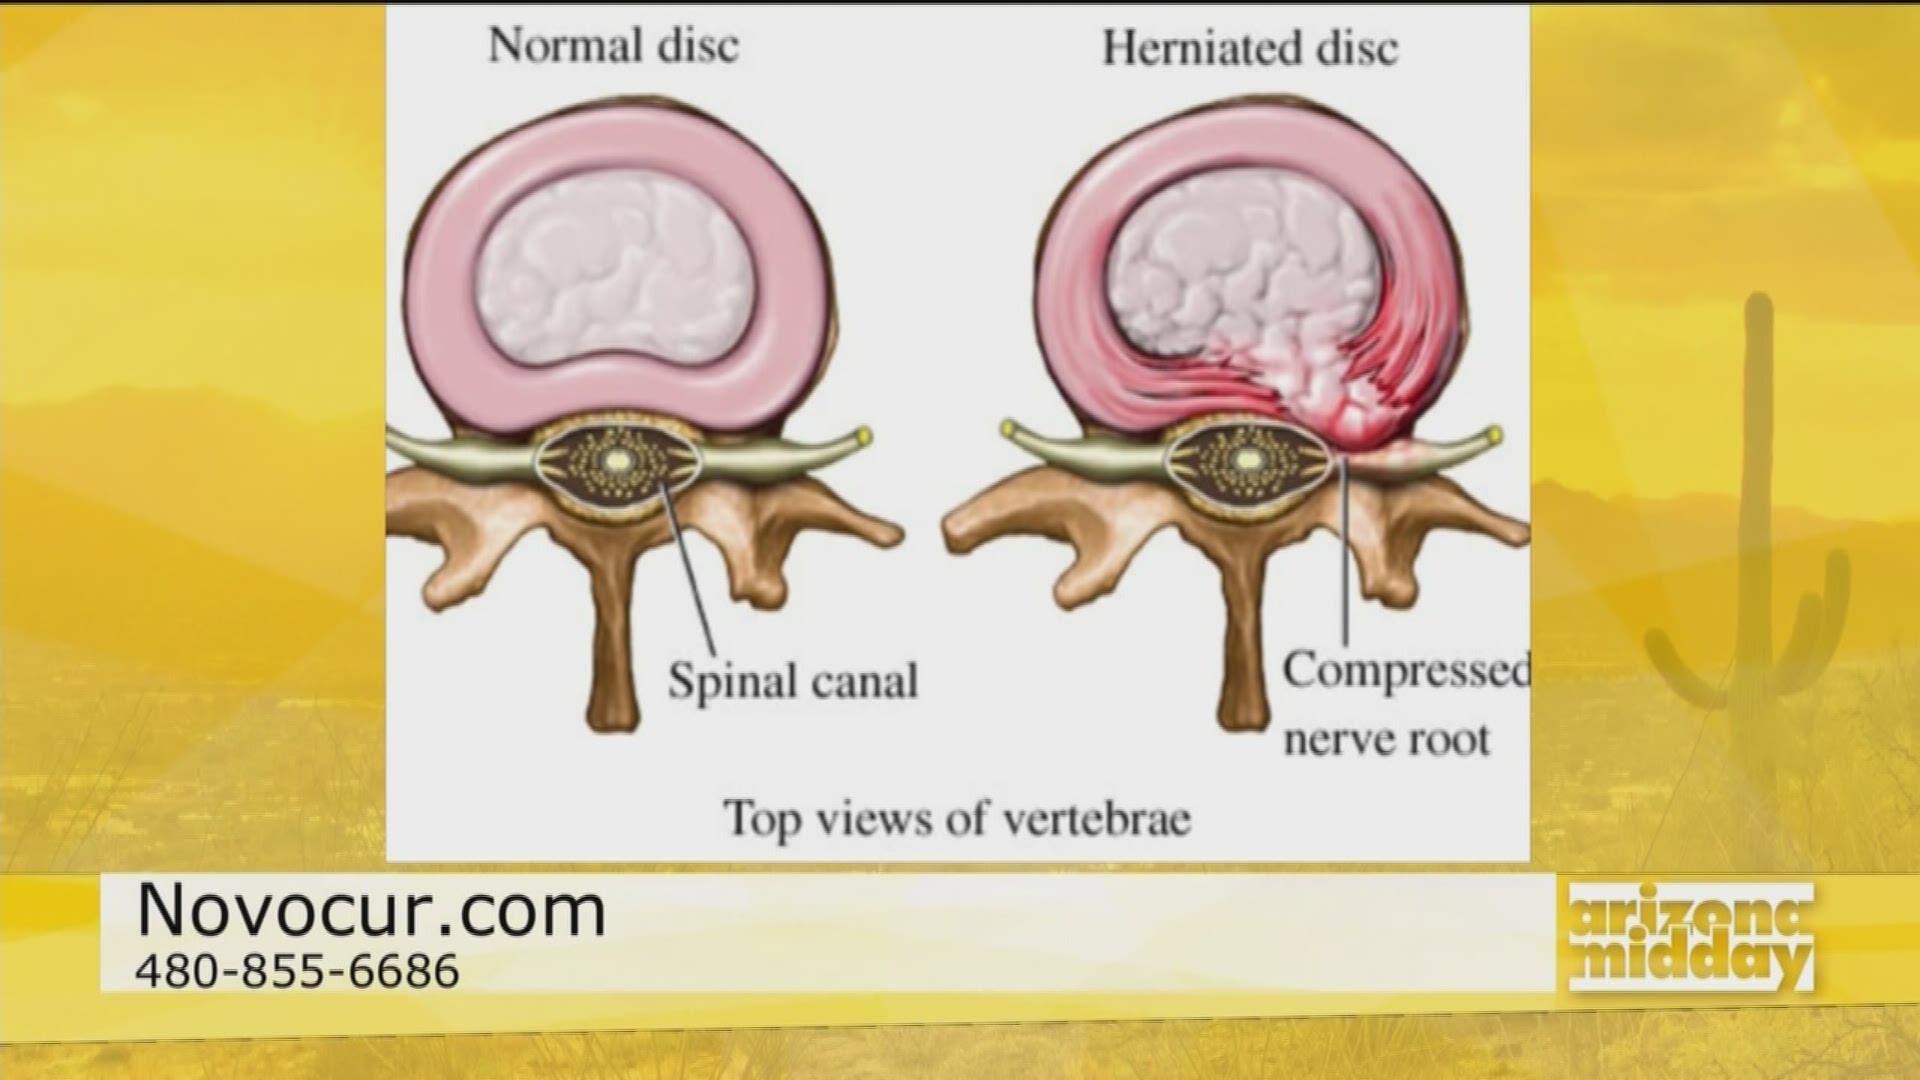 Dr. Alex Bigham of Novocur Pain Management Clinics talks about several treatment options that will relieve herniated disc pain.